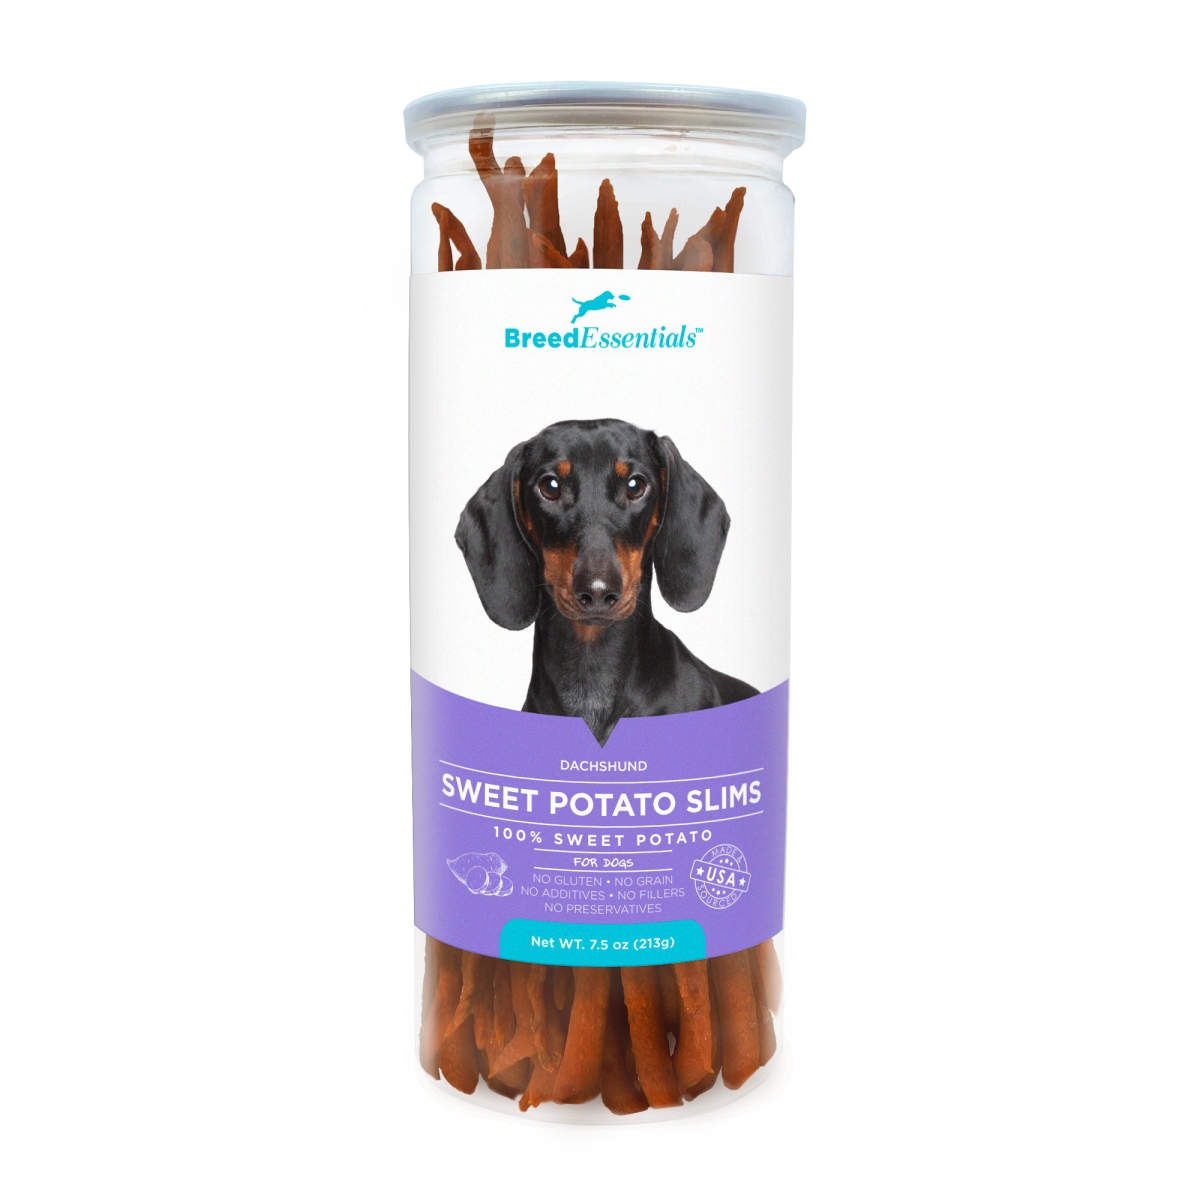 Picture of Breed Essentials 197247000402 7.5 oz Sweet Potato Slims - Dachshund